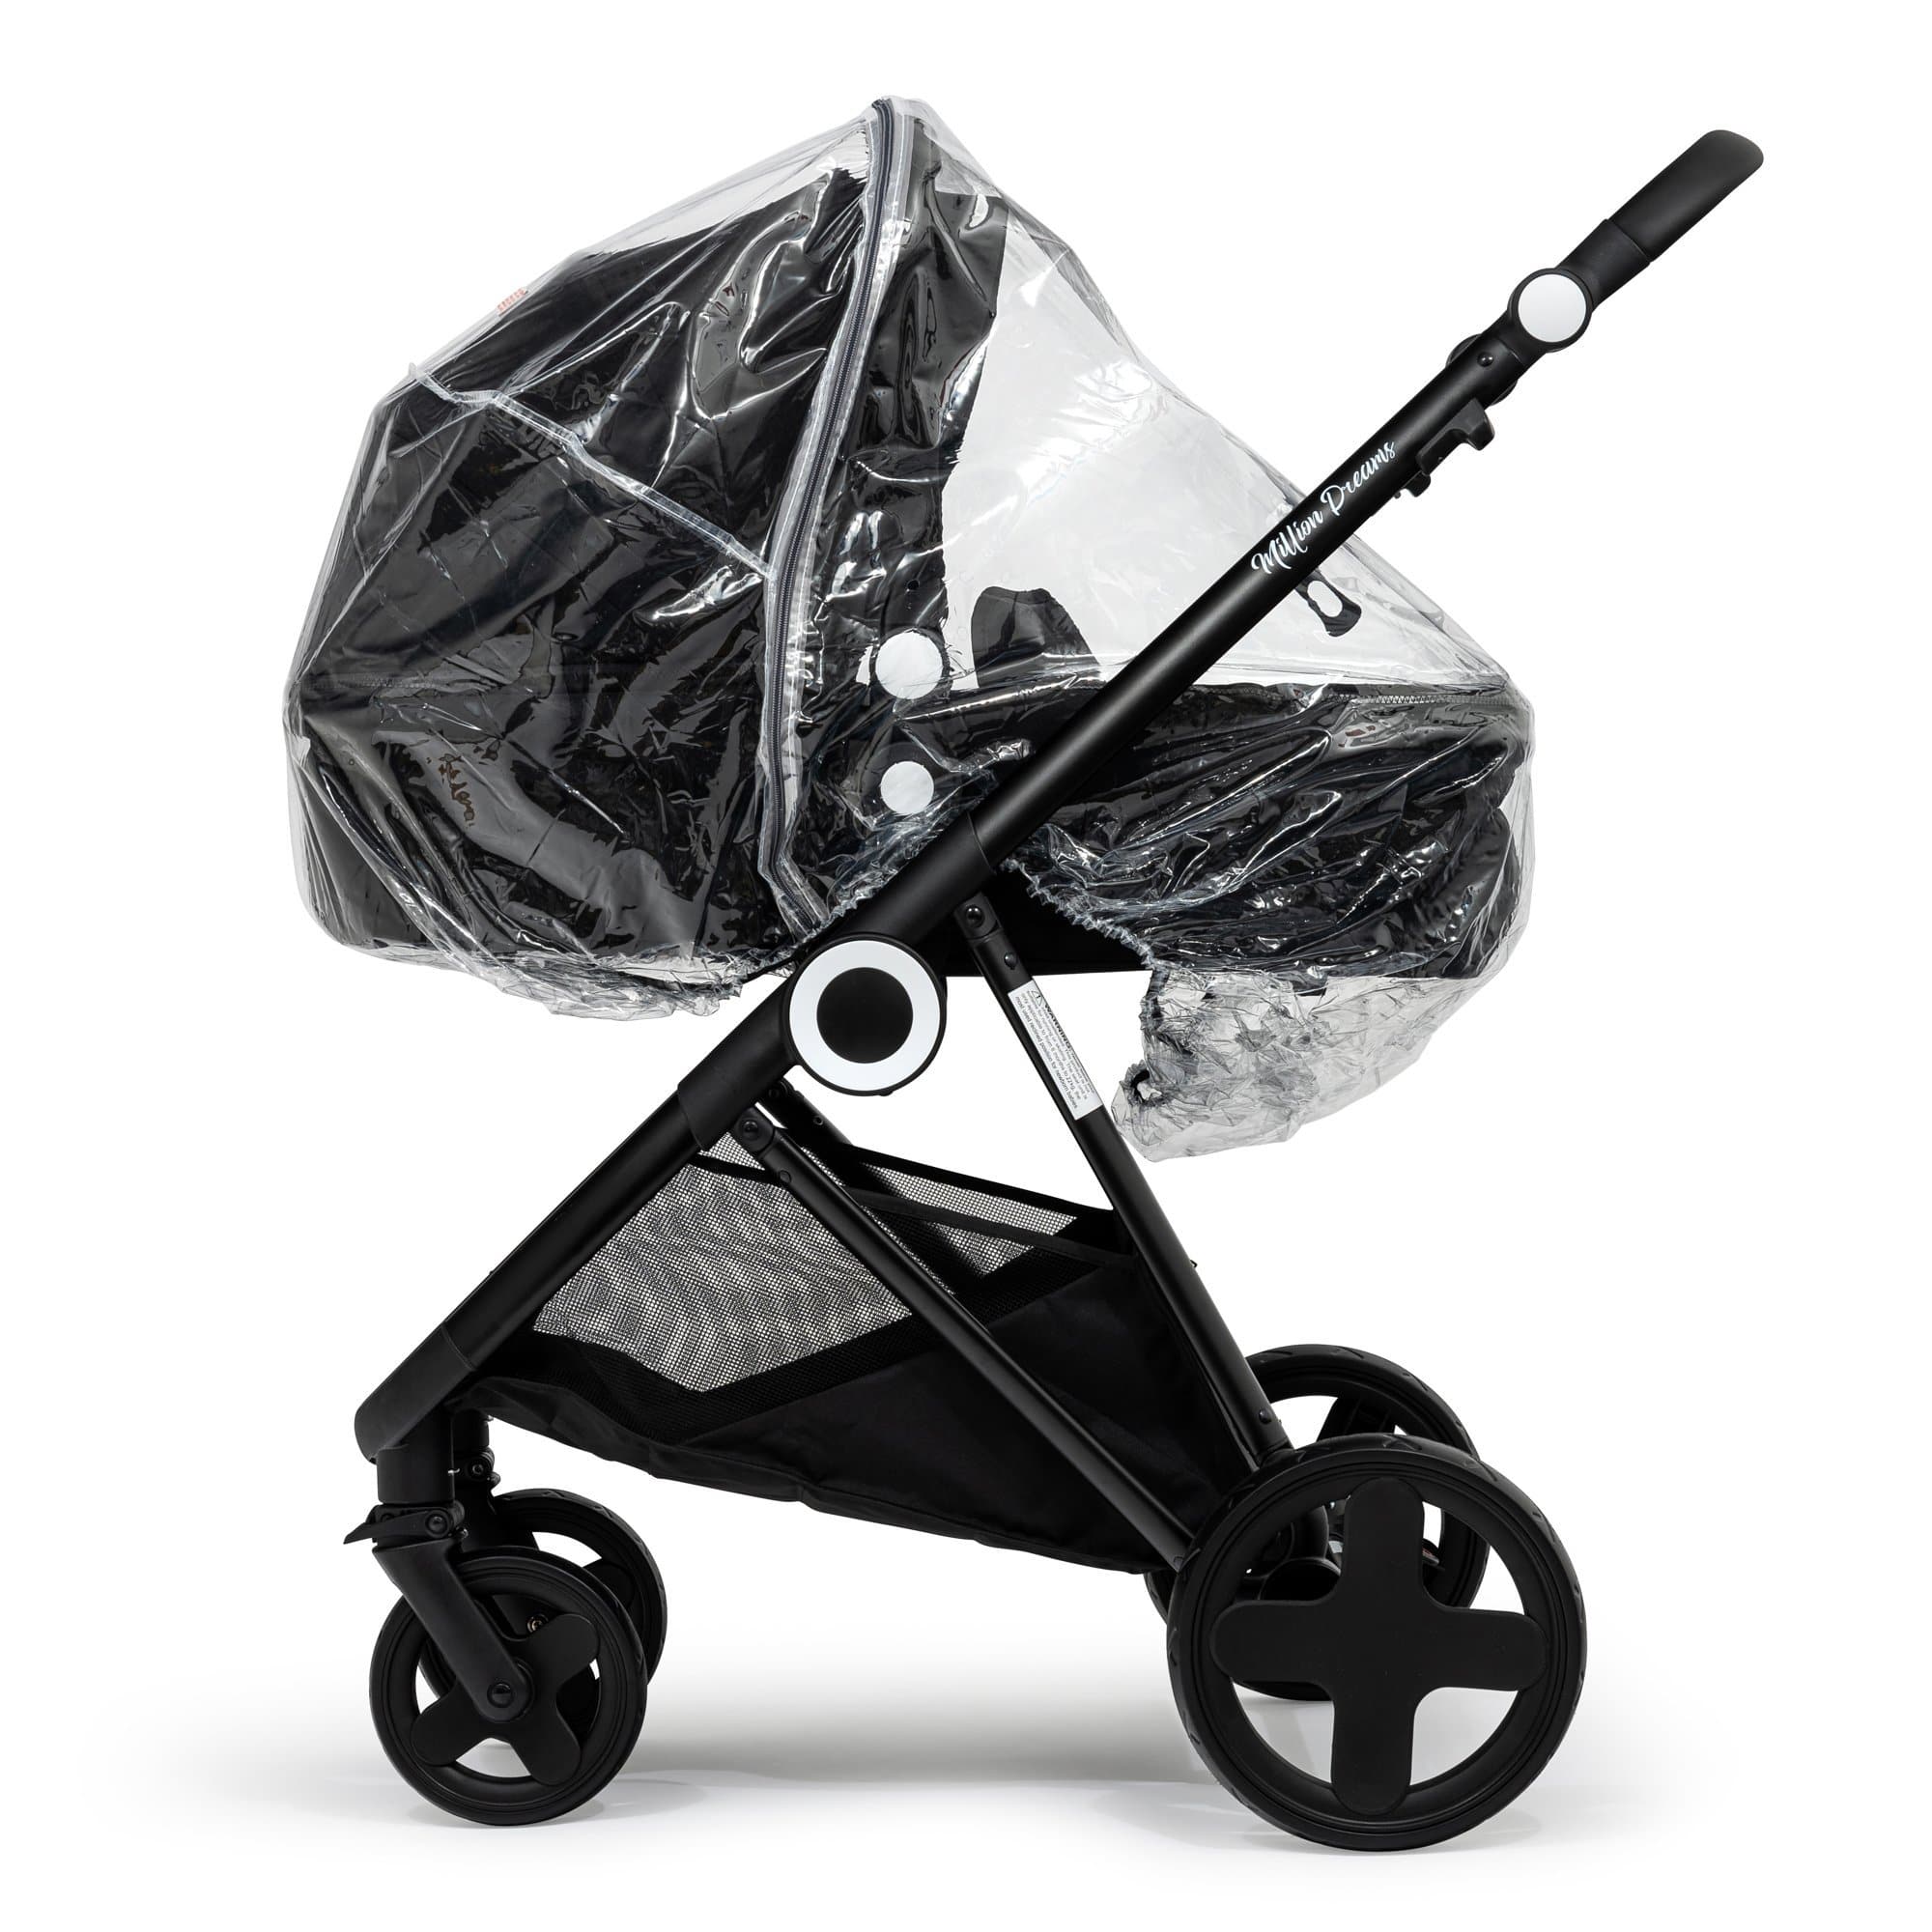 2 in 1 Rain Cover Compatible with Babywelt - Fits All Models - For Your Little One